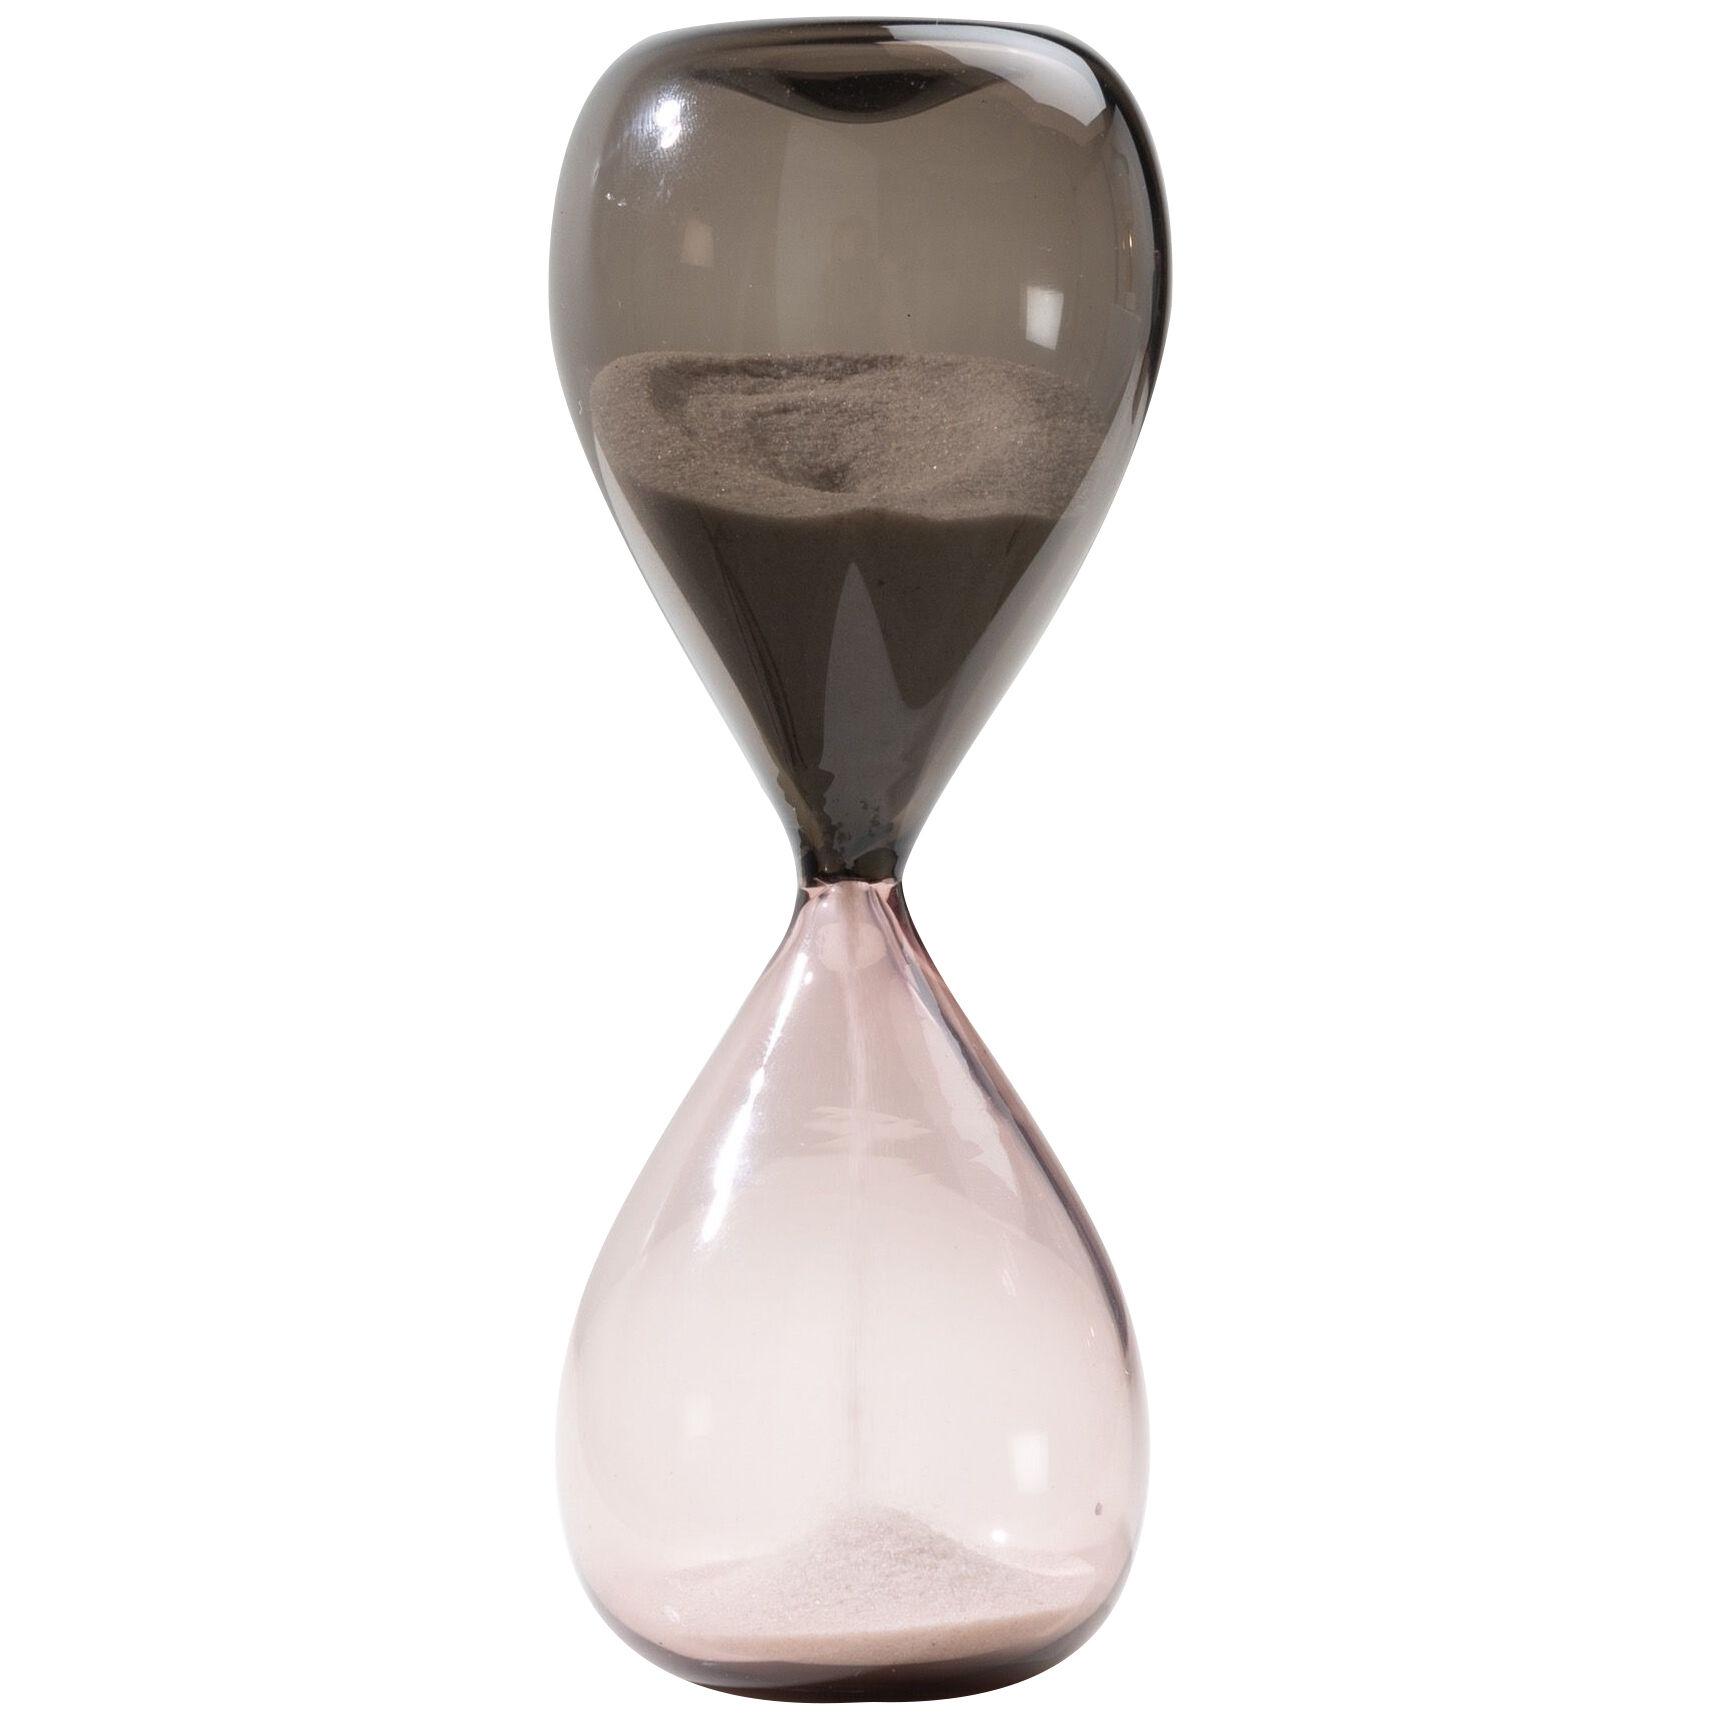 Blown glass hourglass (from the clessidra series) by Paolo Venini 